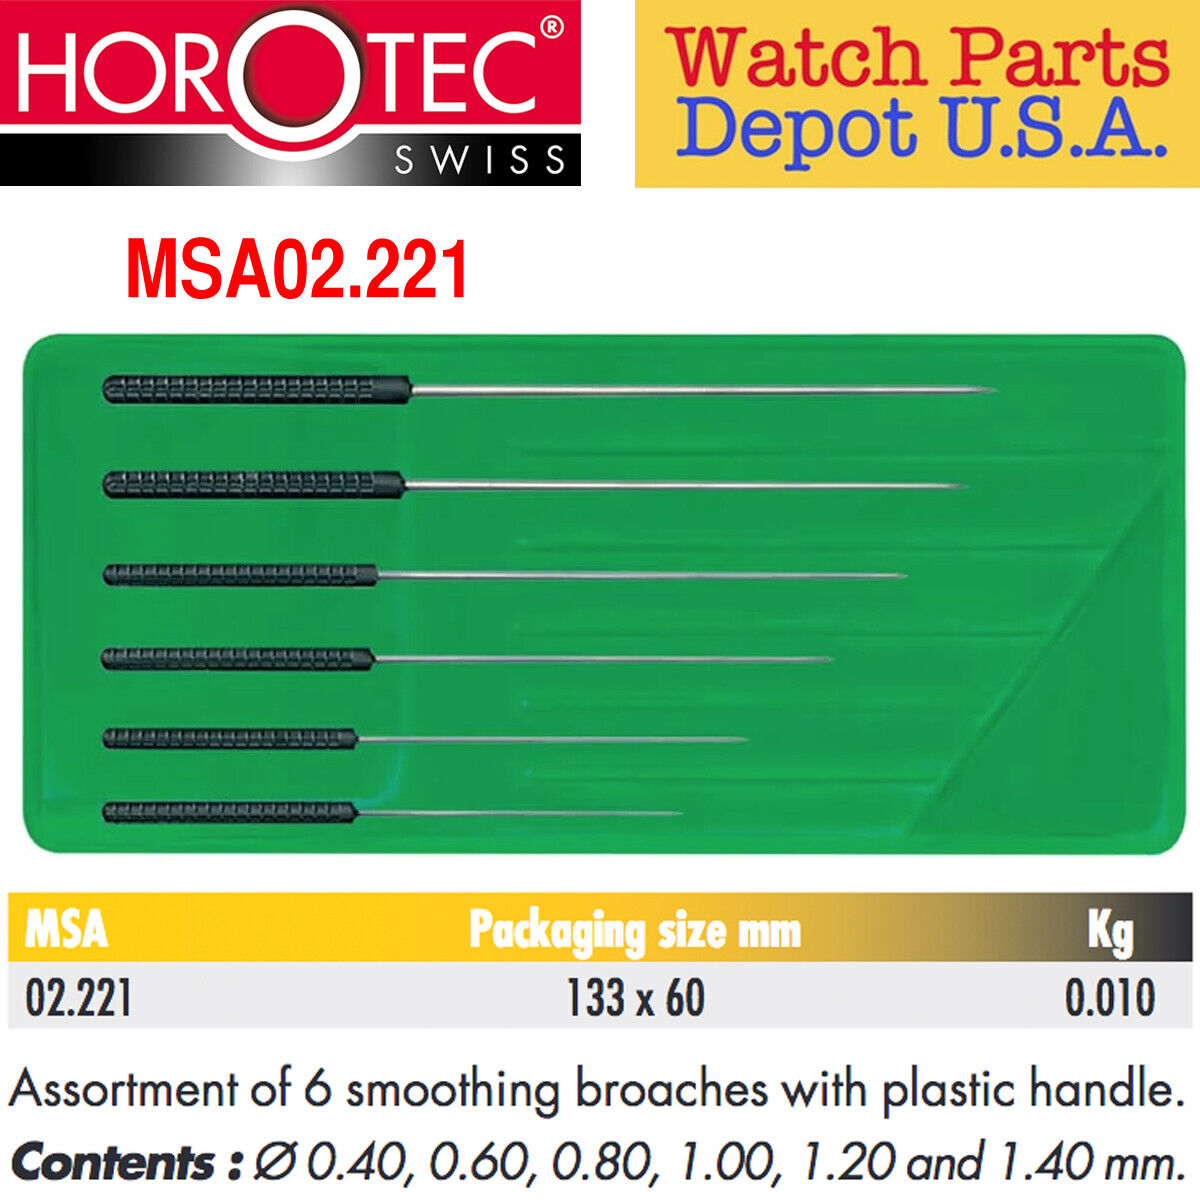 Horotec MSA02.221 Assortment of Smoothing Broaches with Plastic Handle